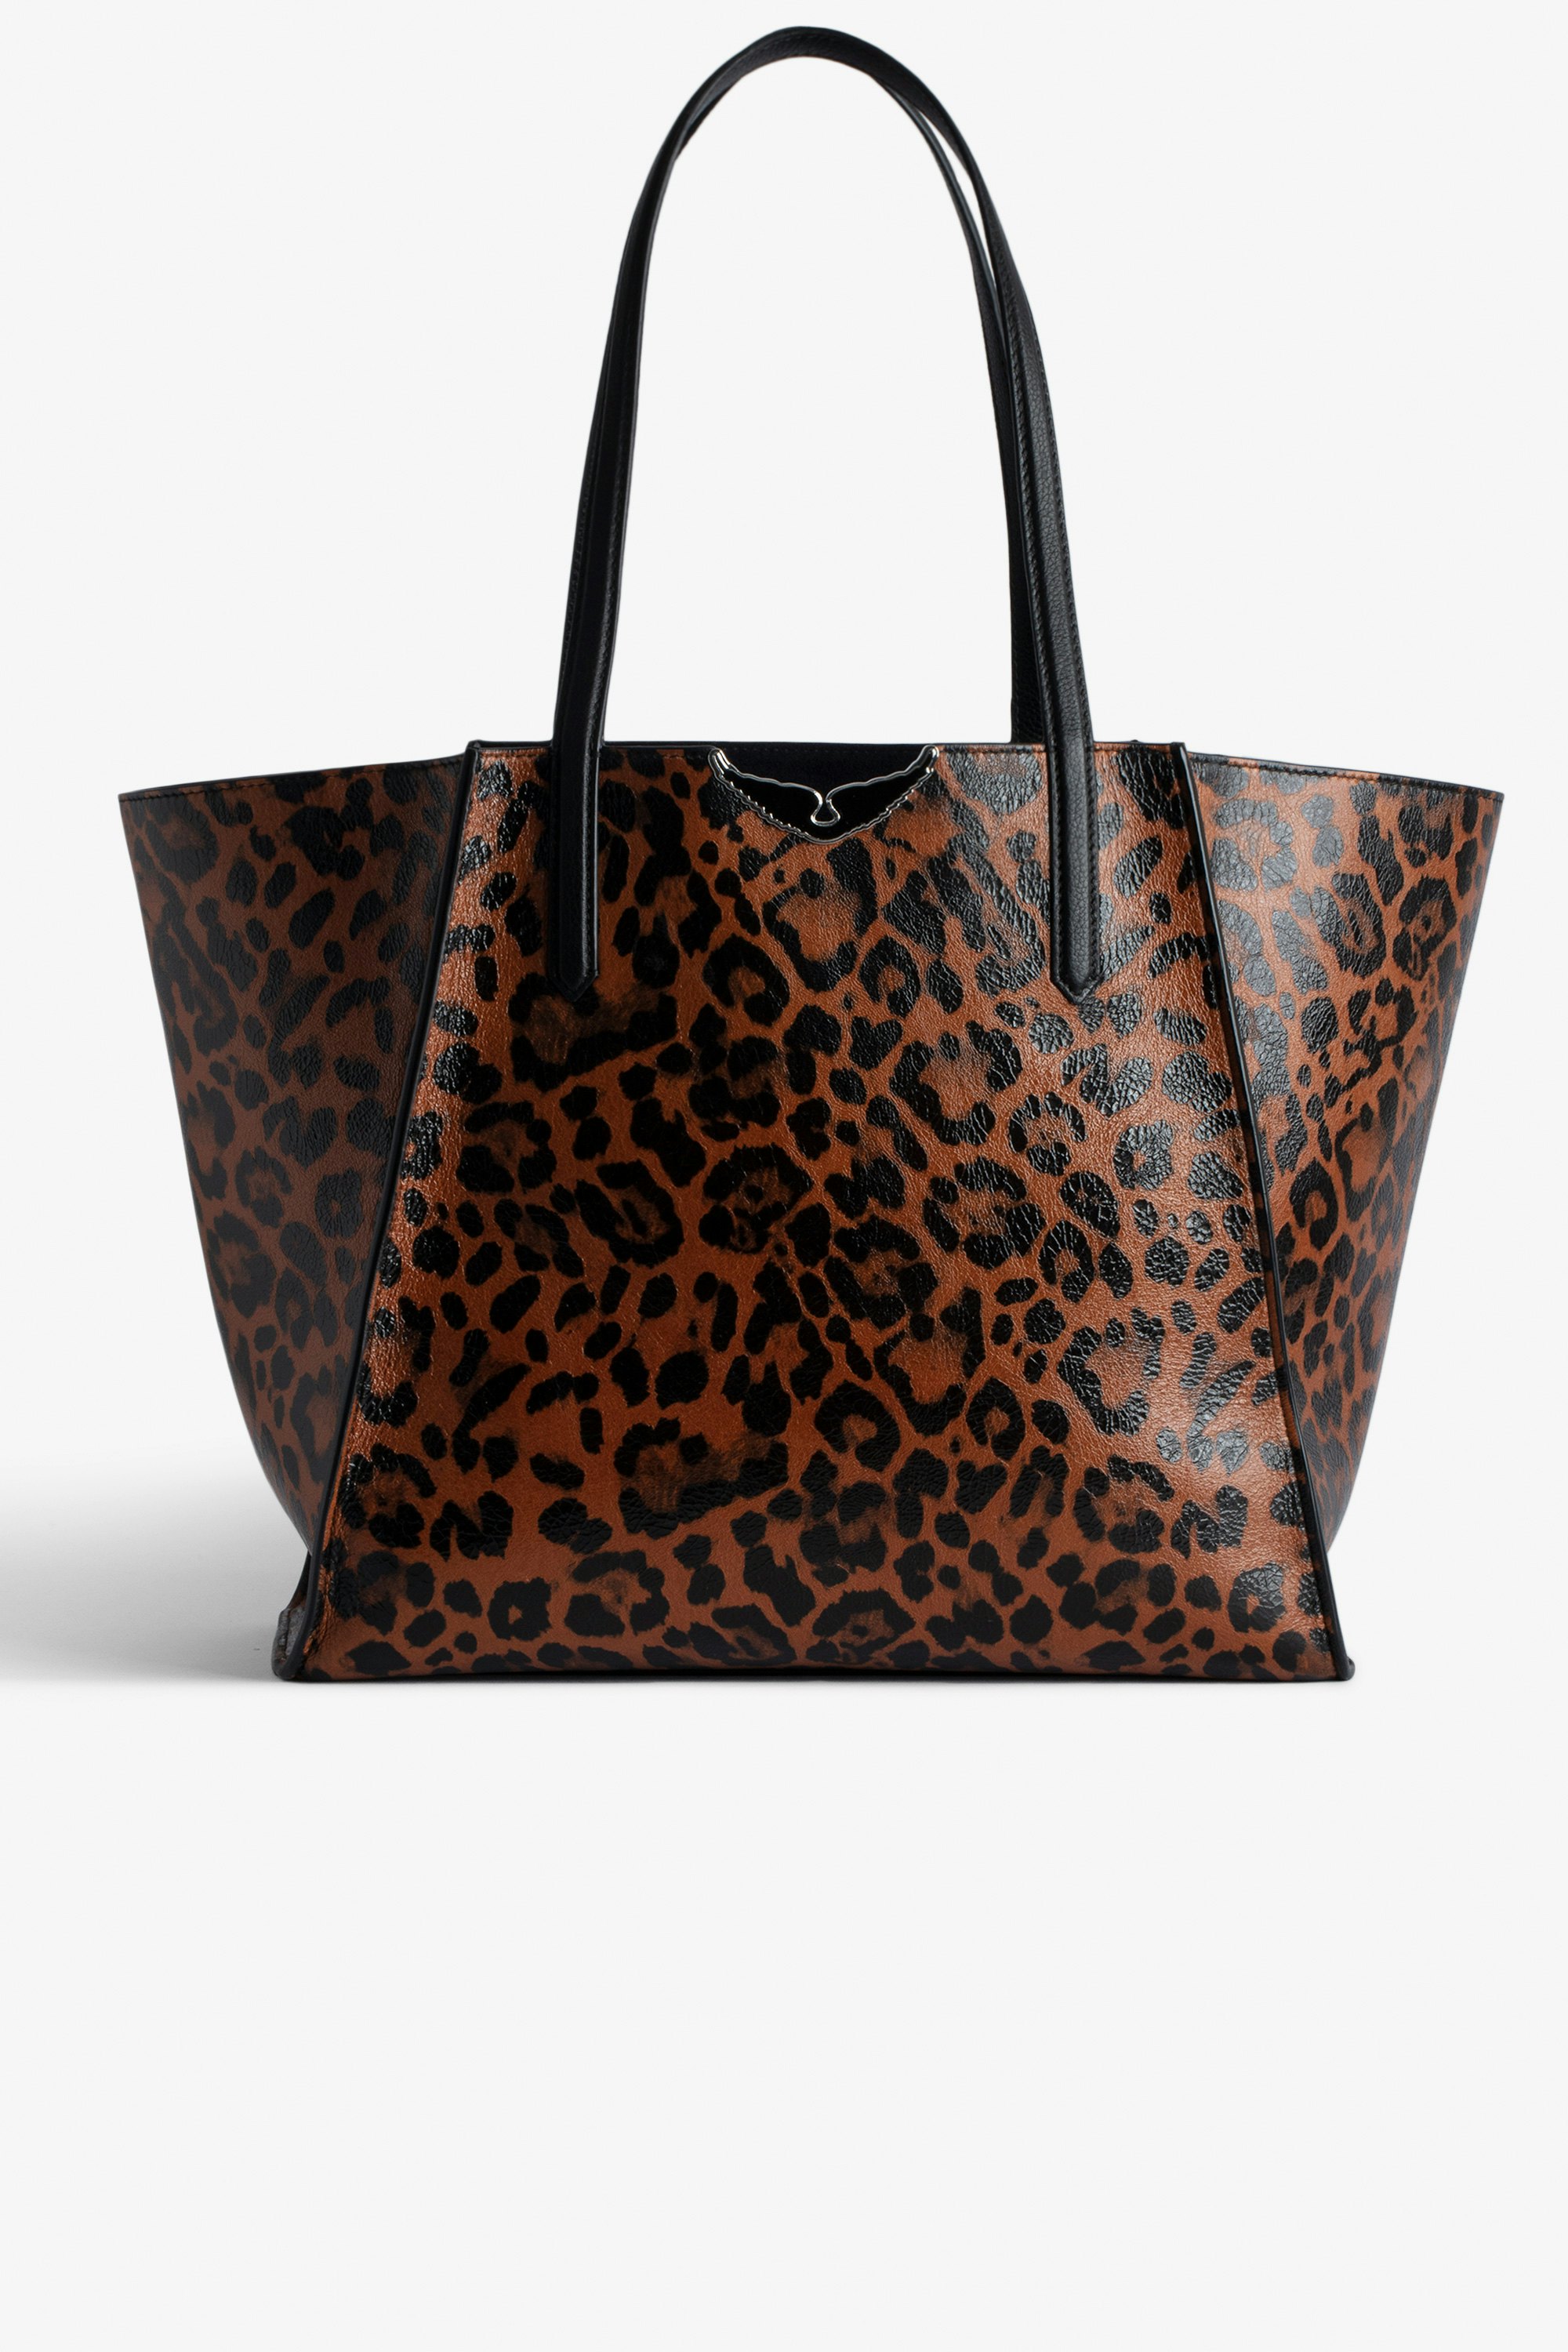 Le Borderline Leopard Bag Women’s reversible tote bag in brown leopard-print patent leather with handle and metal wings.